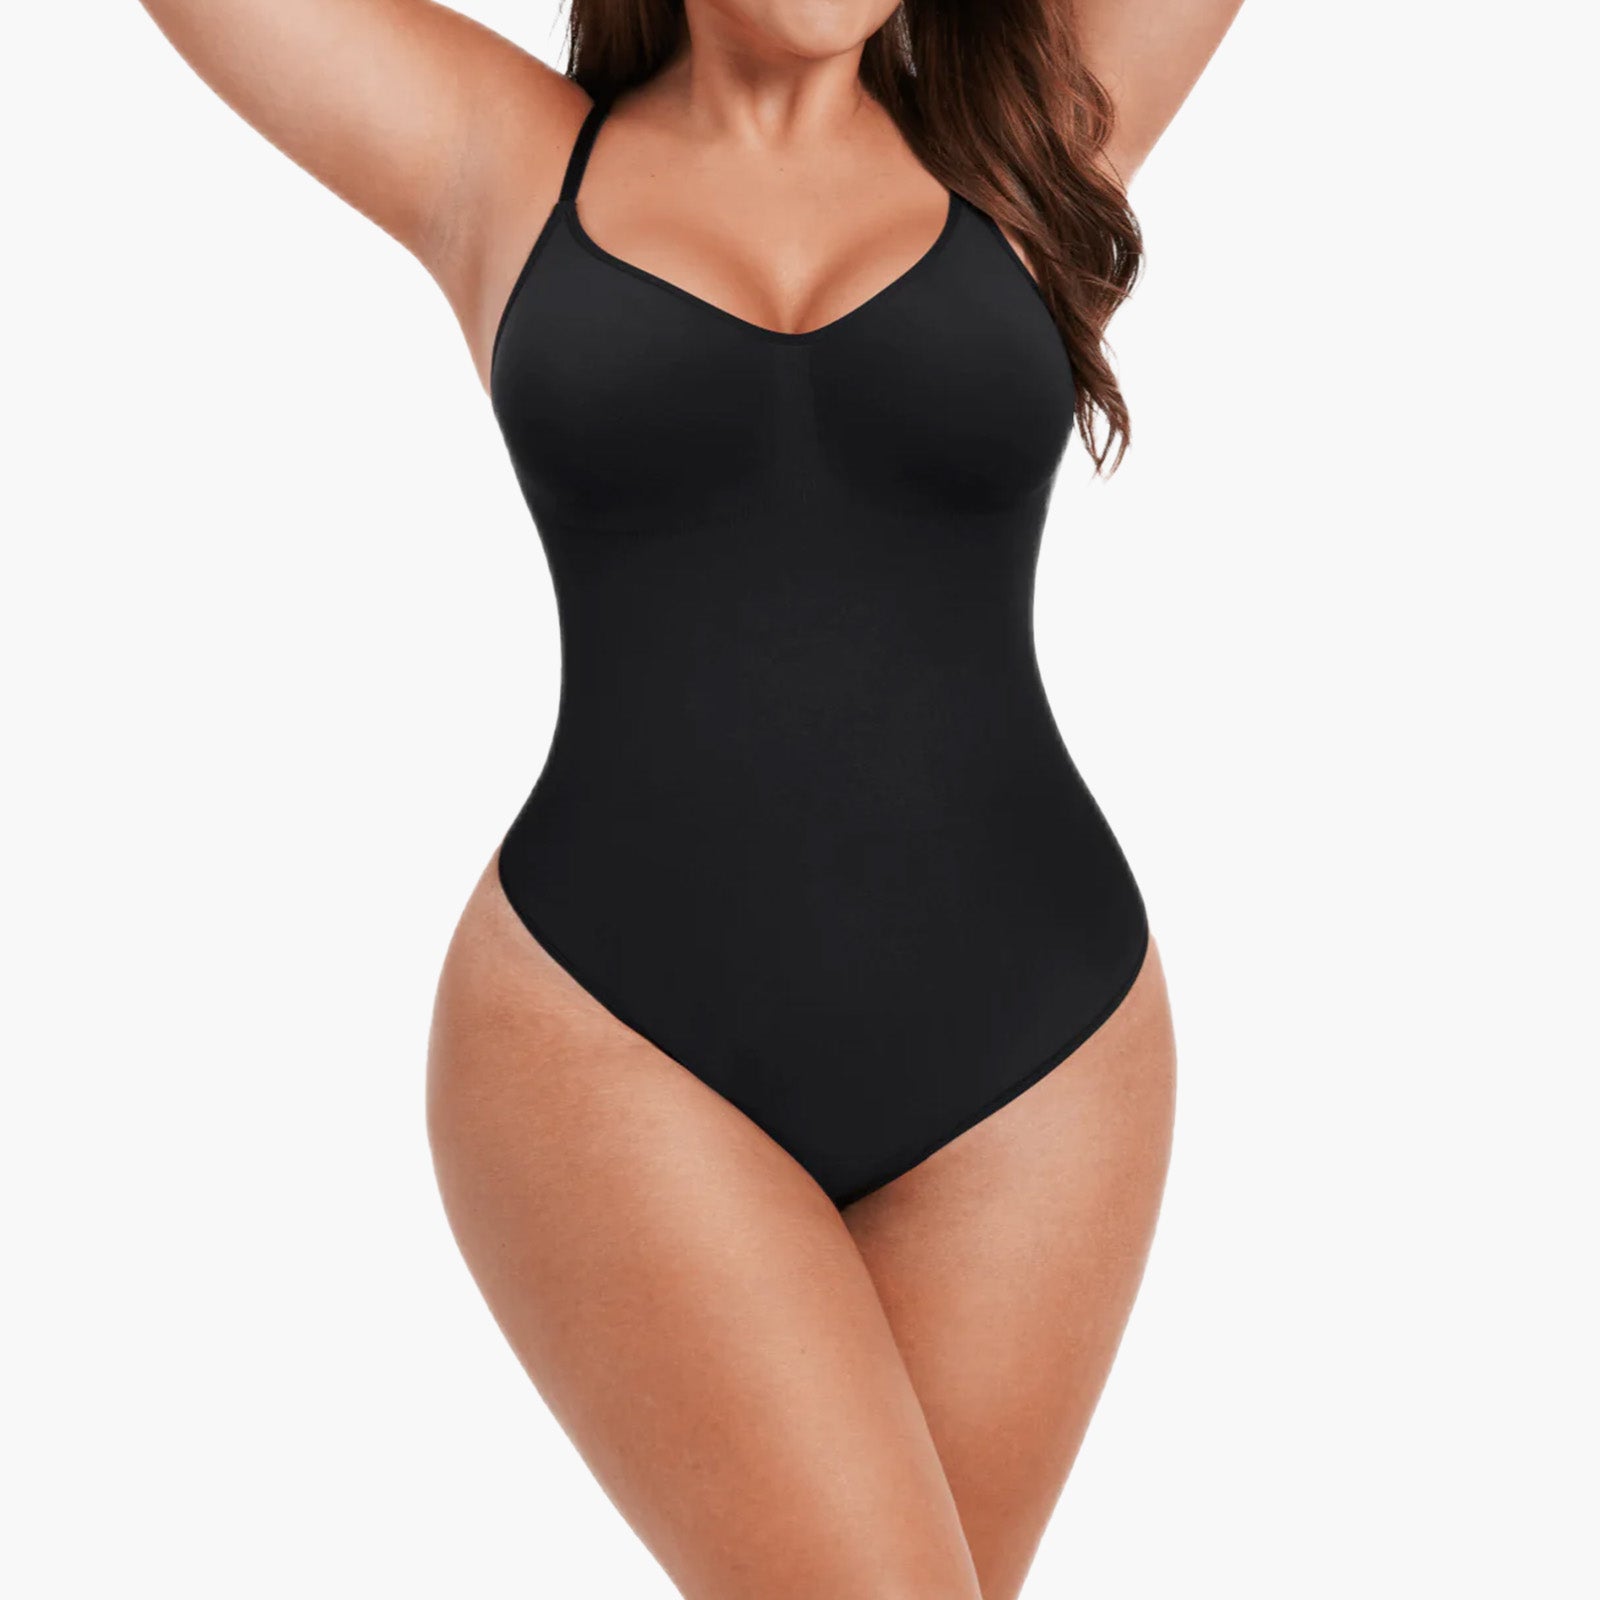 Smooothees Shaping Thong Bodysuit